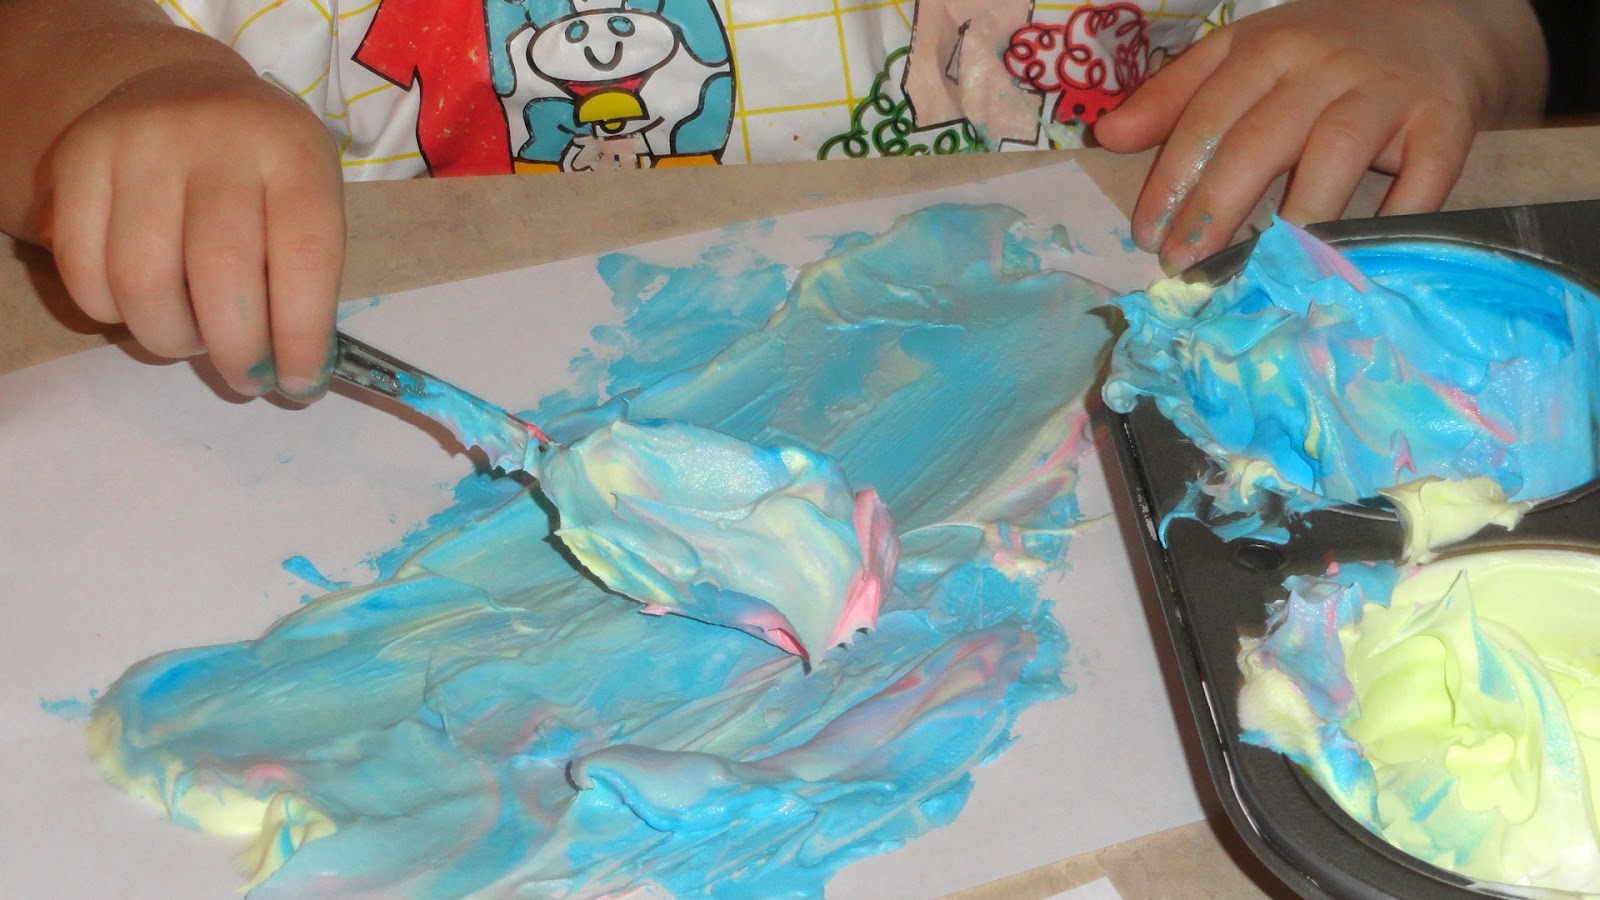 Mess making: quality time in 3-2-1